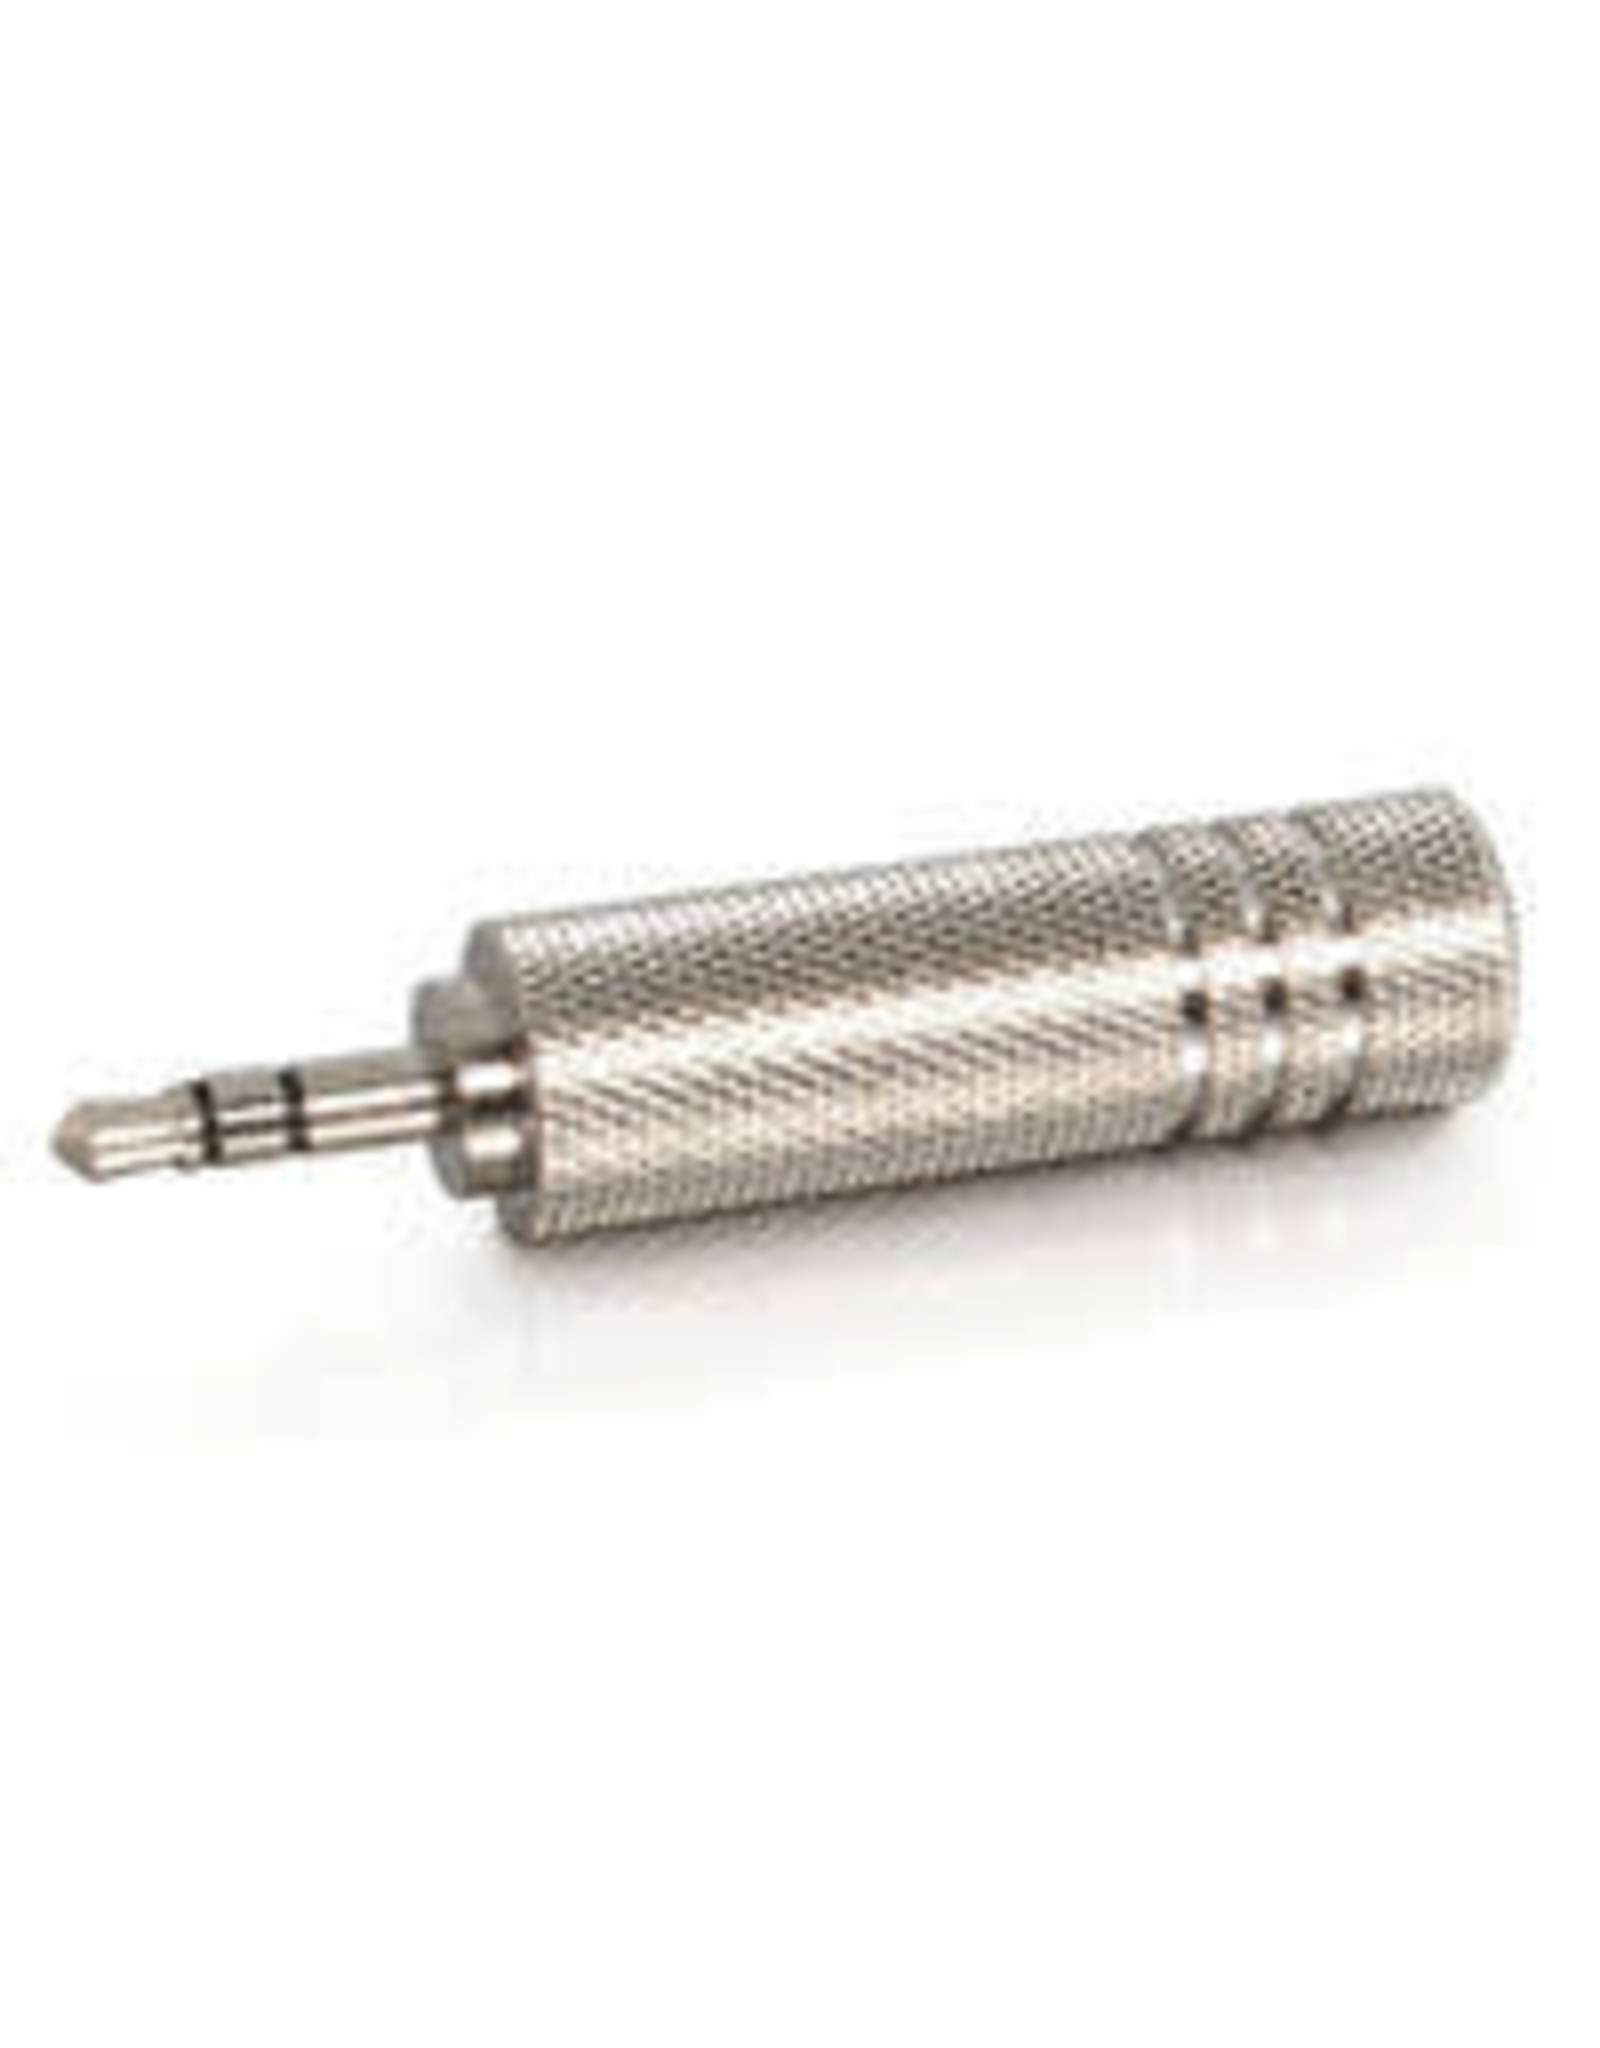 C2G 3.5MM STEREO MALE TO 6.3MM STEREO FEMALE